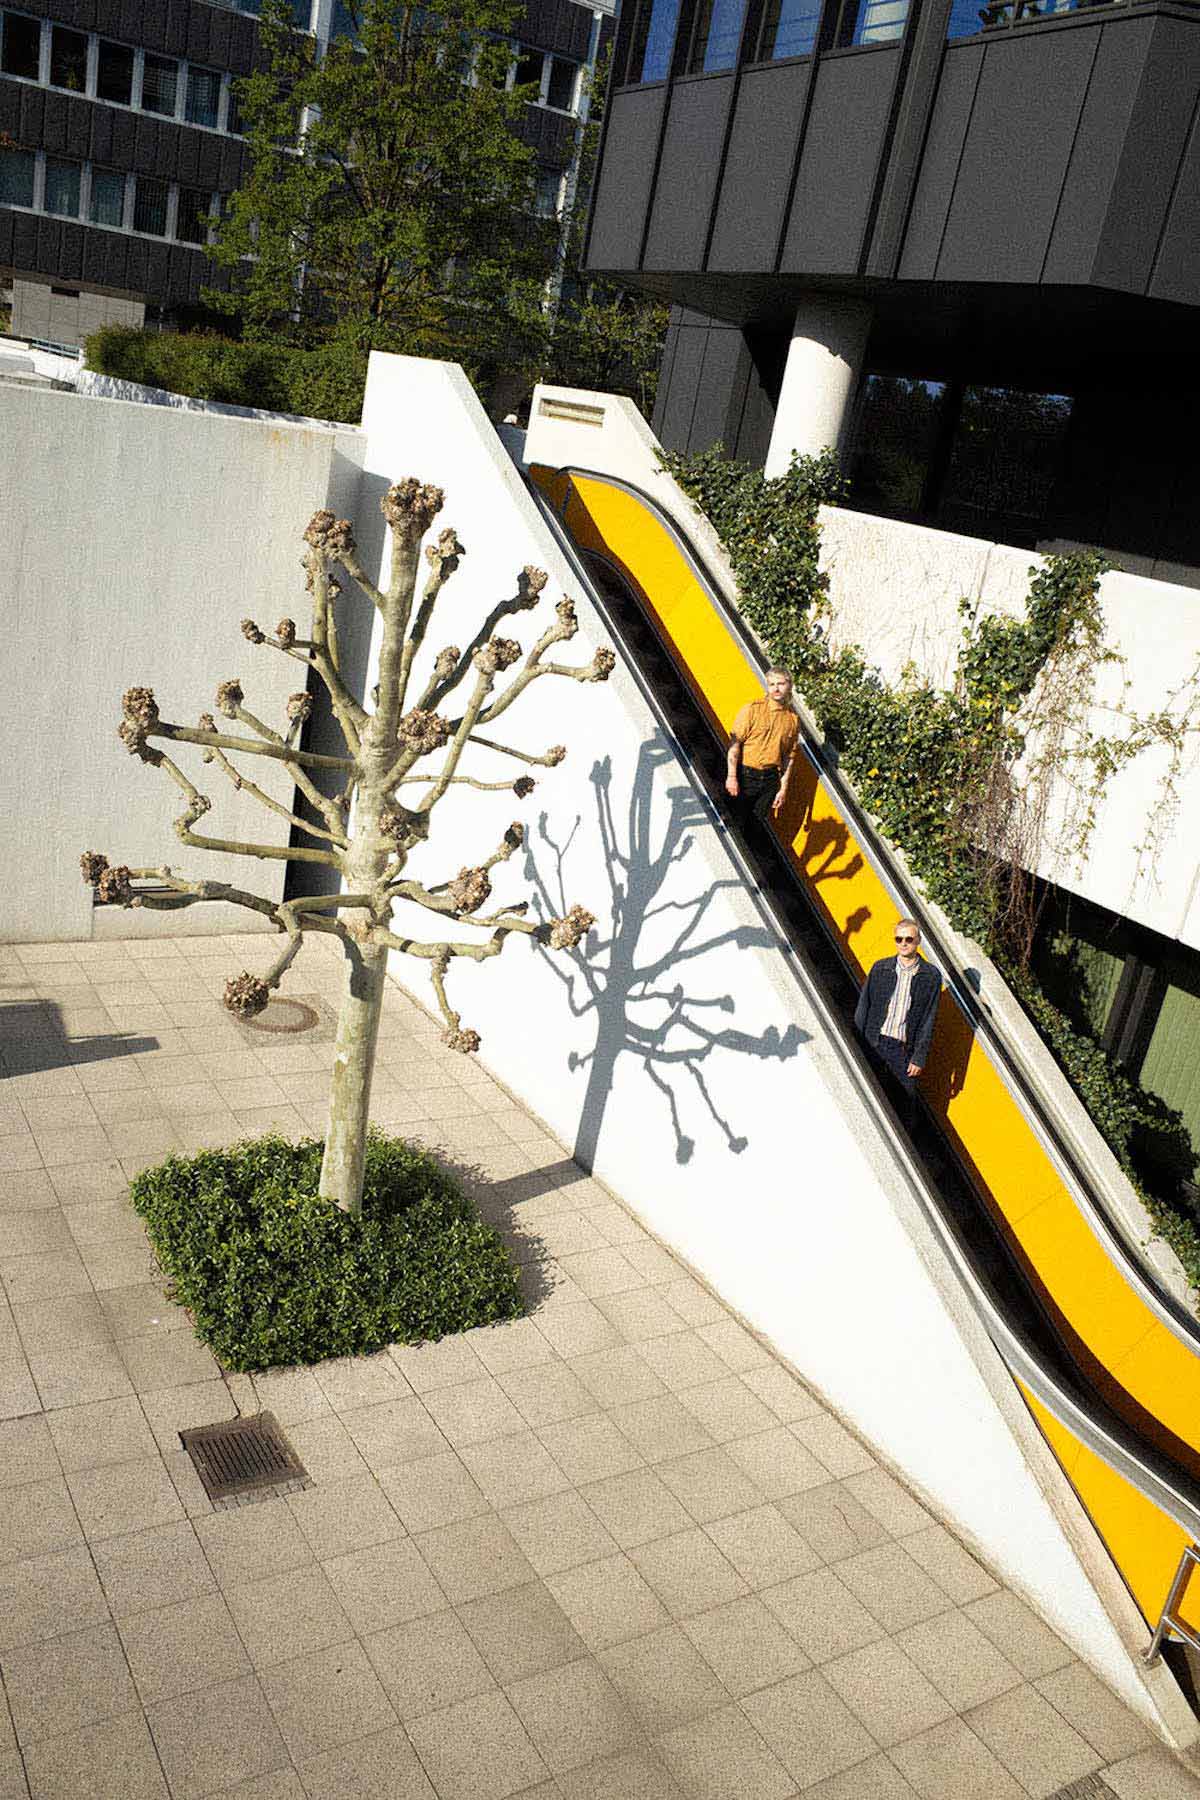 A yellow escalator leads down to a courtyard surrounded by office buildings with many windows. The courtyard is covered with square concrete slabs. In the courtyard, to the left of the escalator, a tree with thick branches and no leaves stands on a small square piece of green space. On the escalator, Schulverweis, two white men with short hair, can be seen on their way down, looking at the camera from a distance.